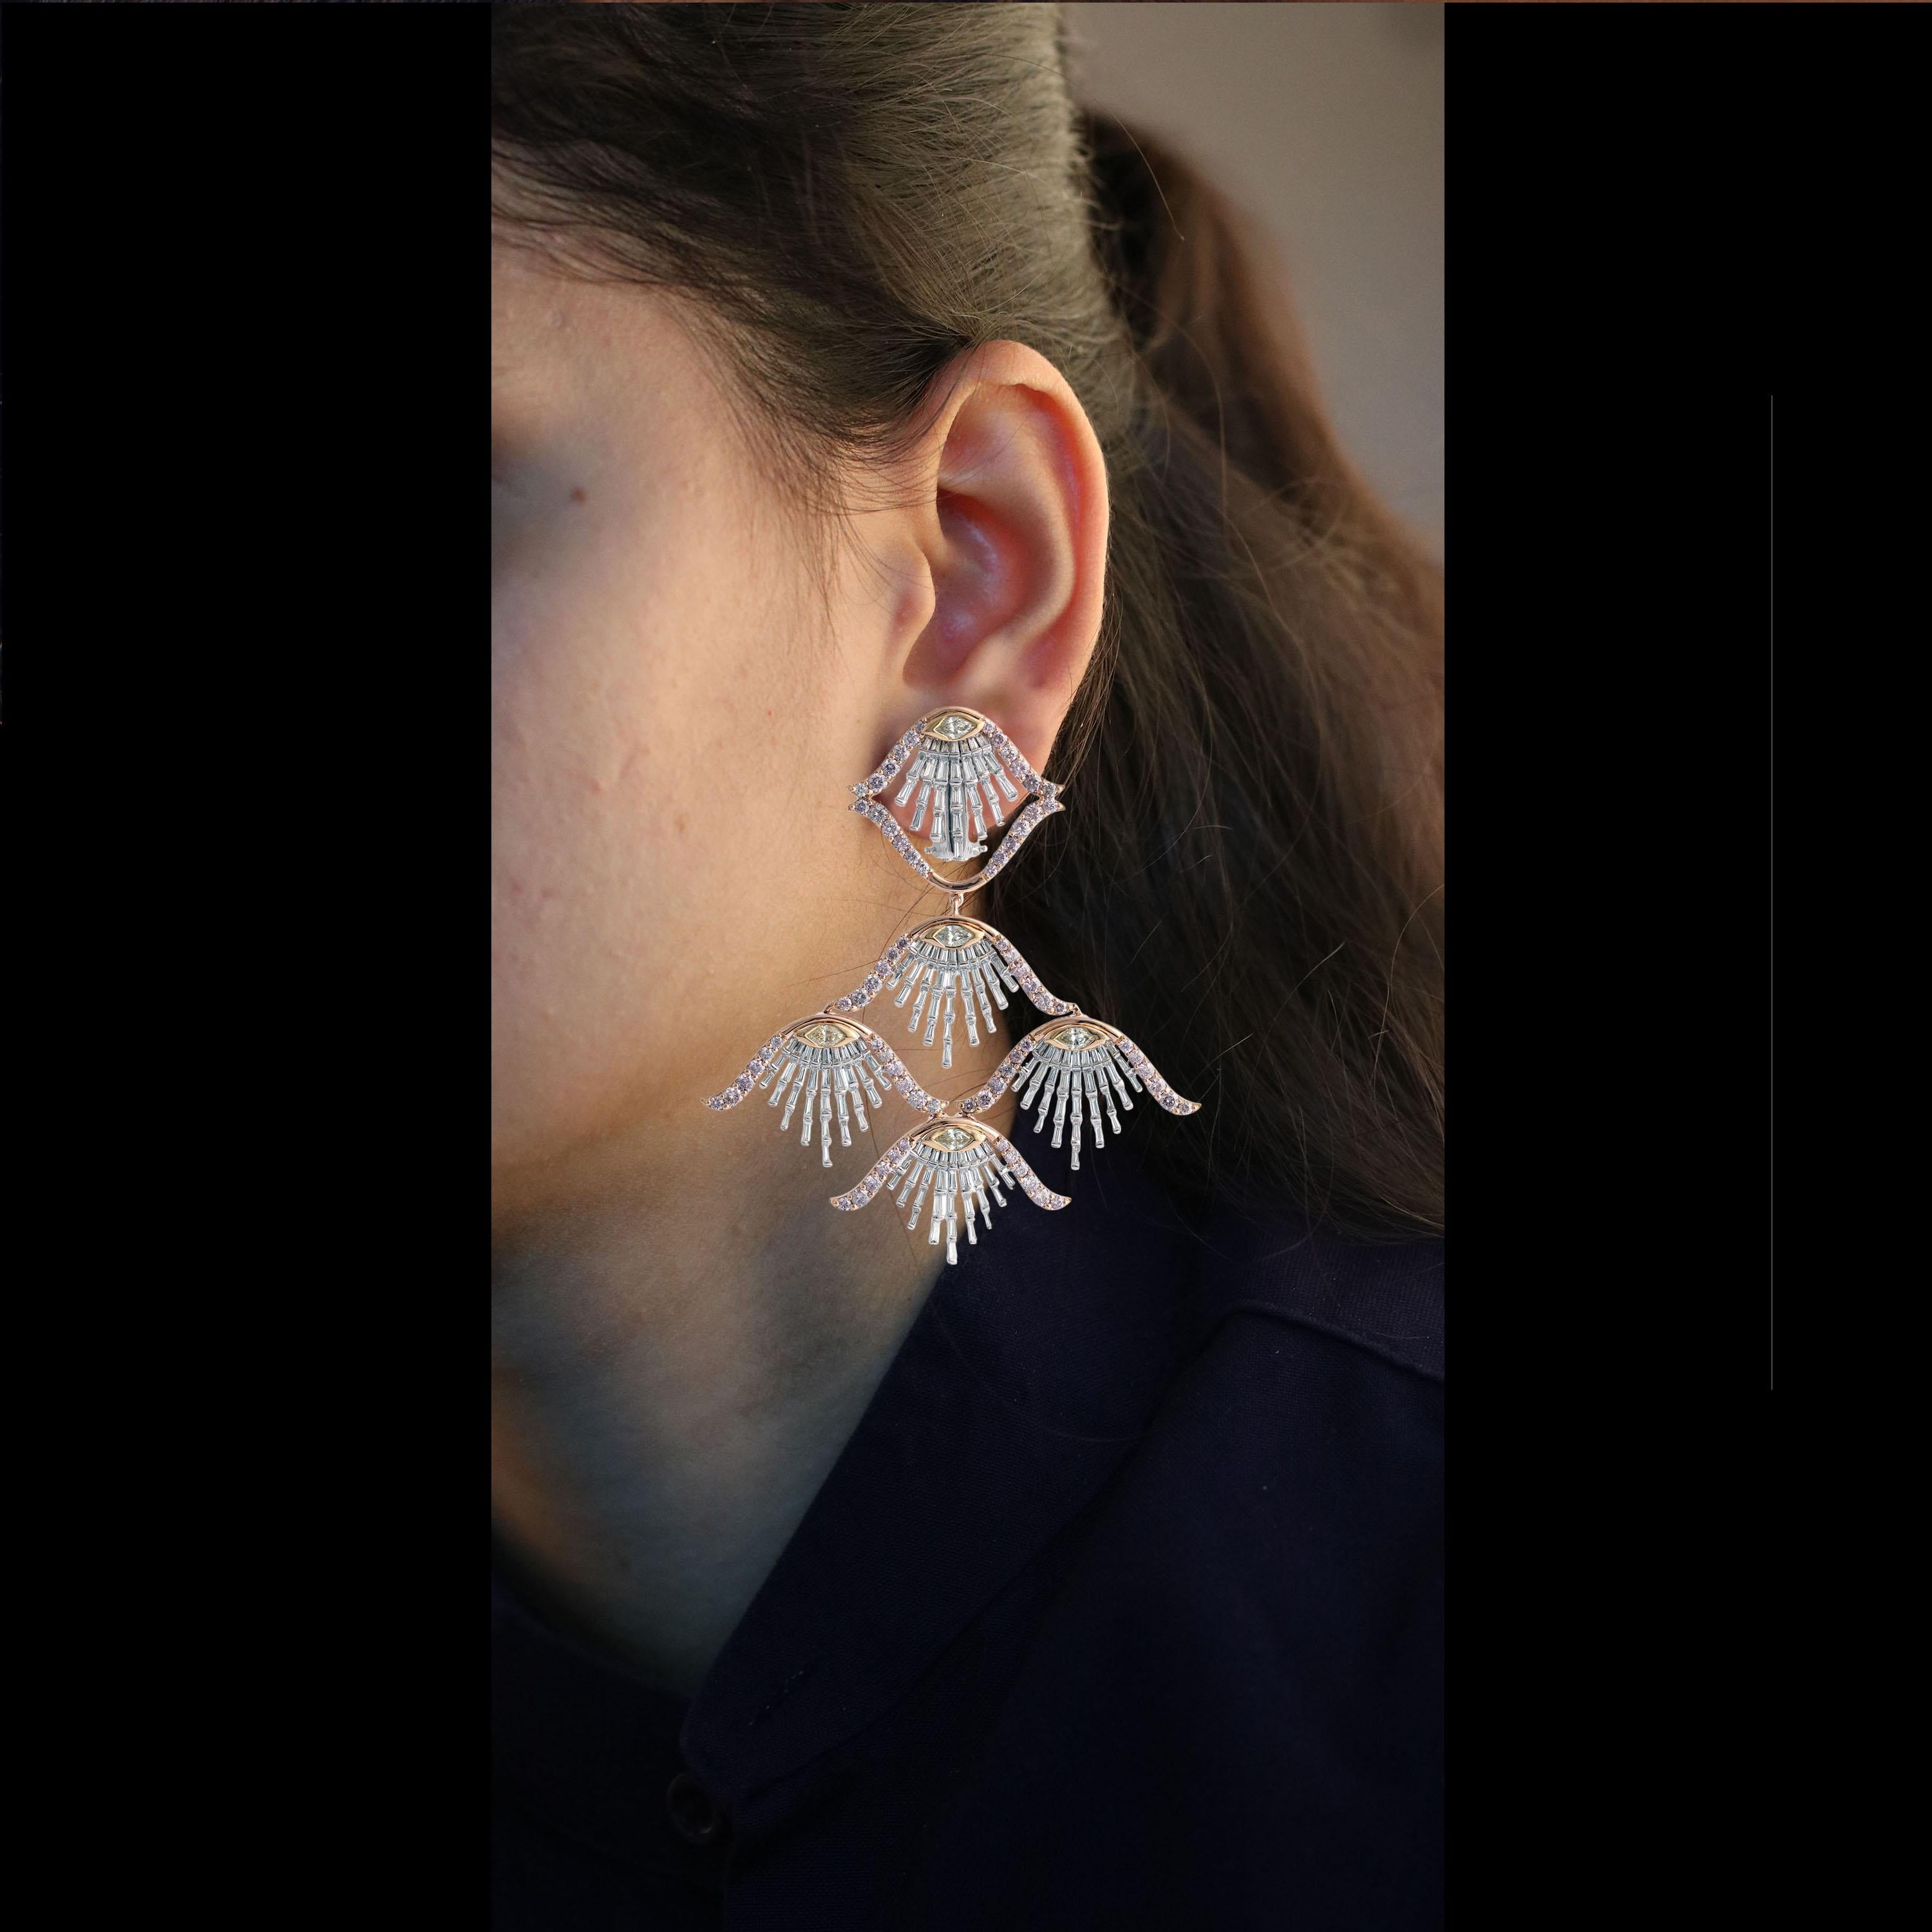 Gross Weight: 32.59 Grams
Diamond Weight: 7.65 Carats
Currently Not Graded. IGI Certification can be done on request.

More videos and photos can be shared on request.

These pair of dangling earrings are inspired by the seashells. Exquisite